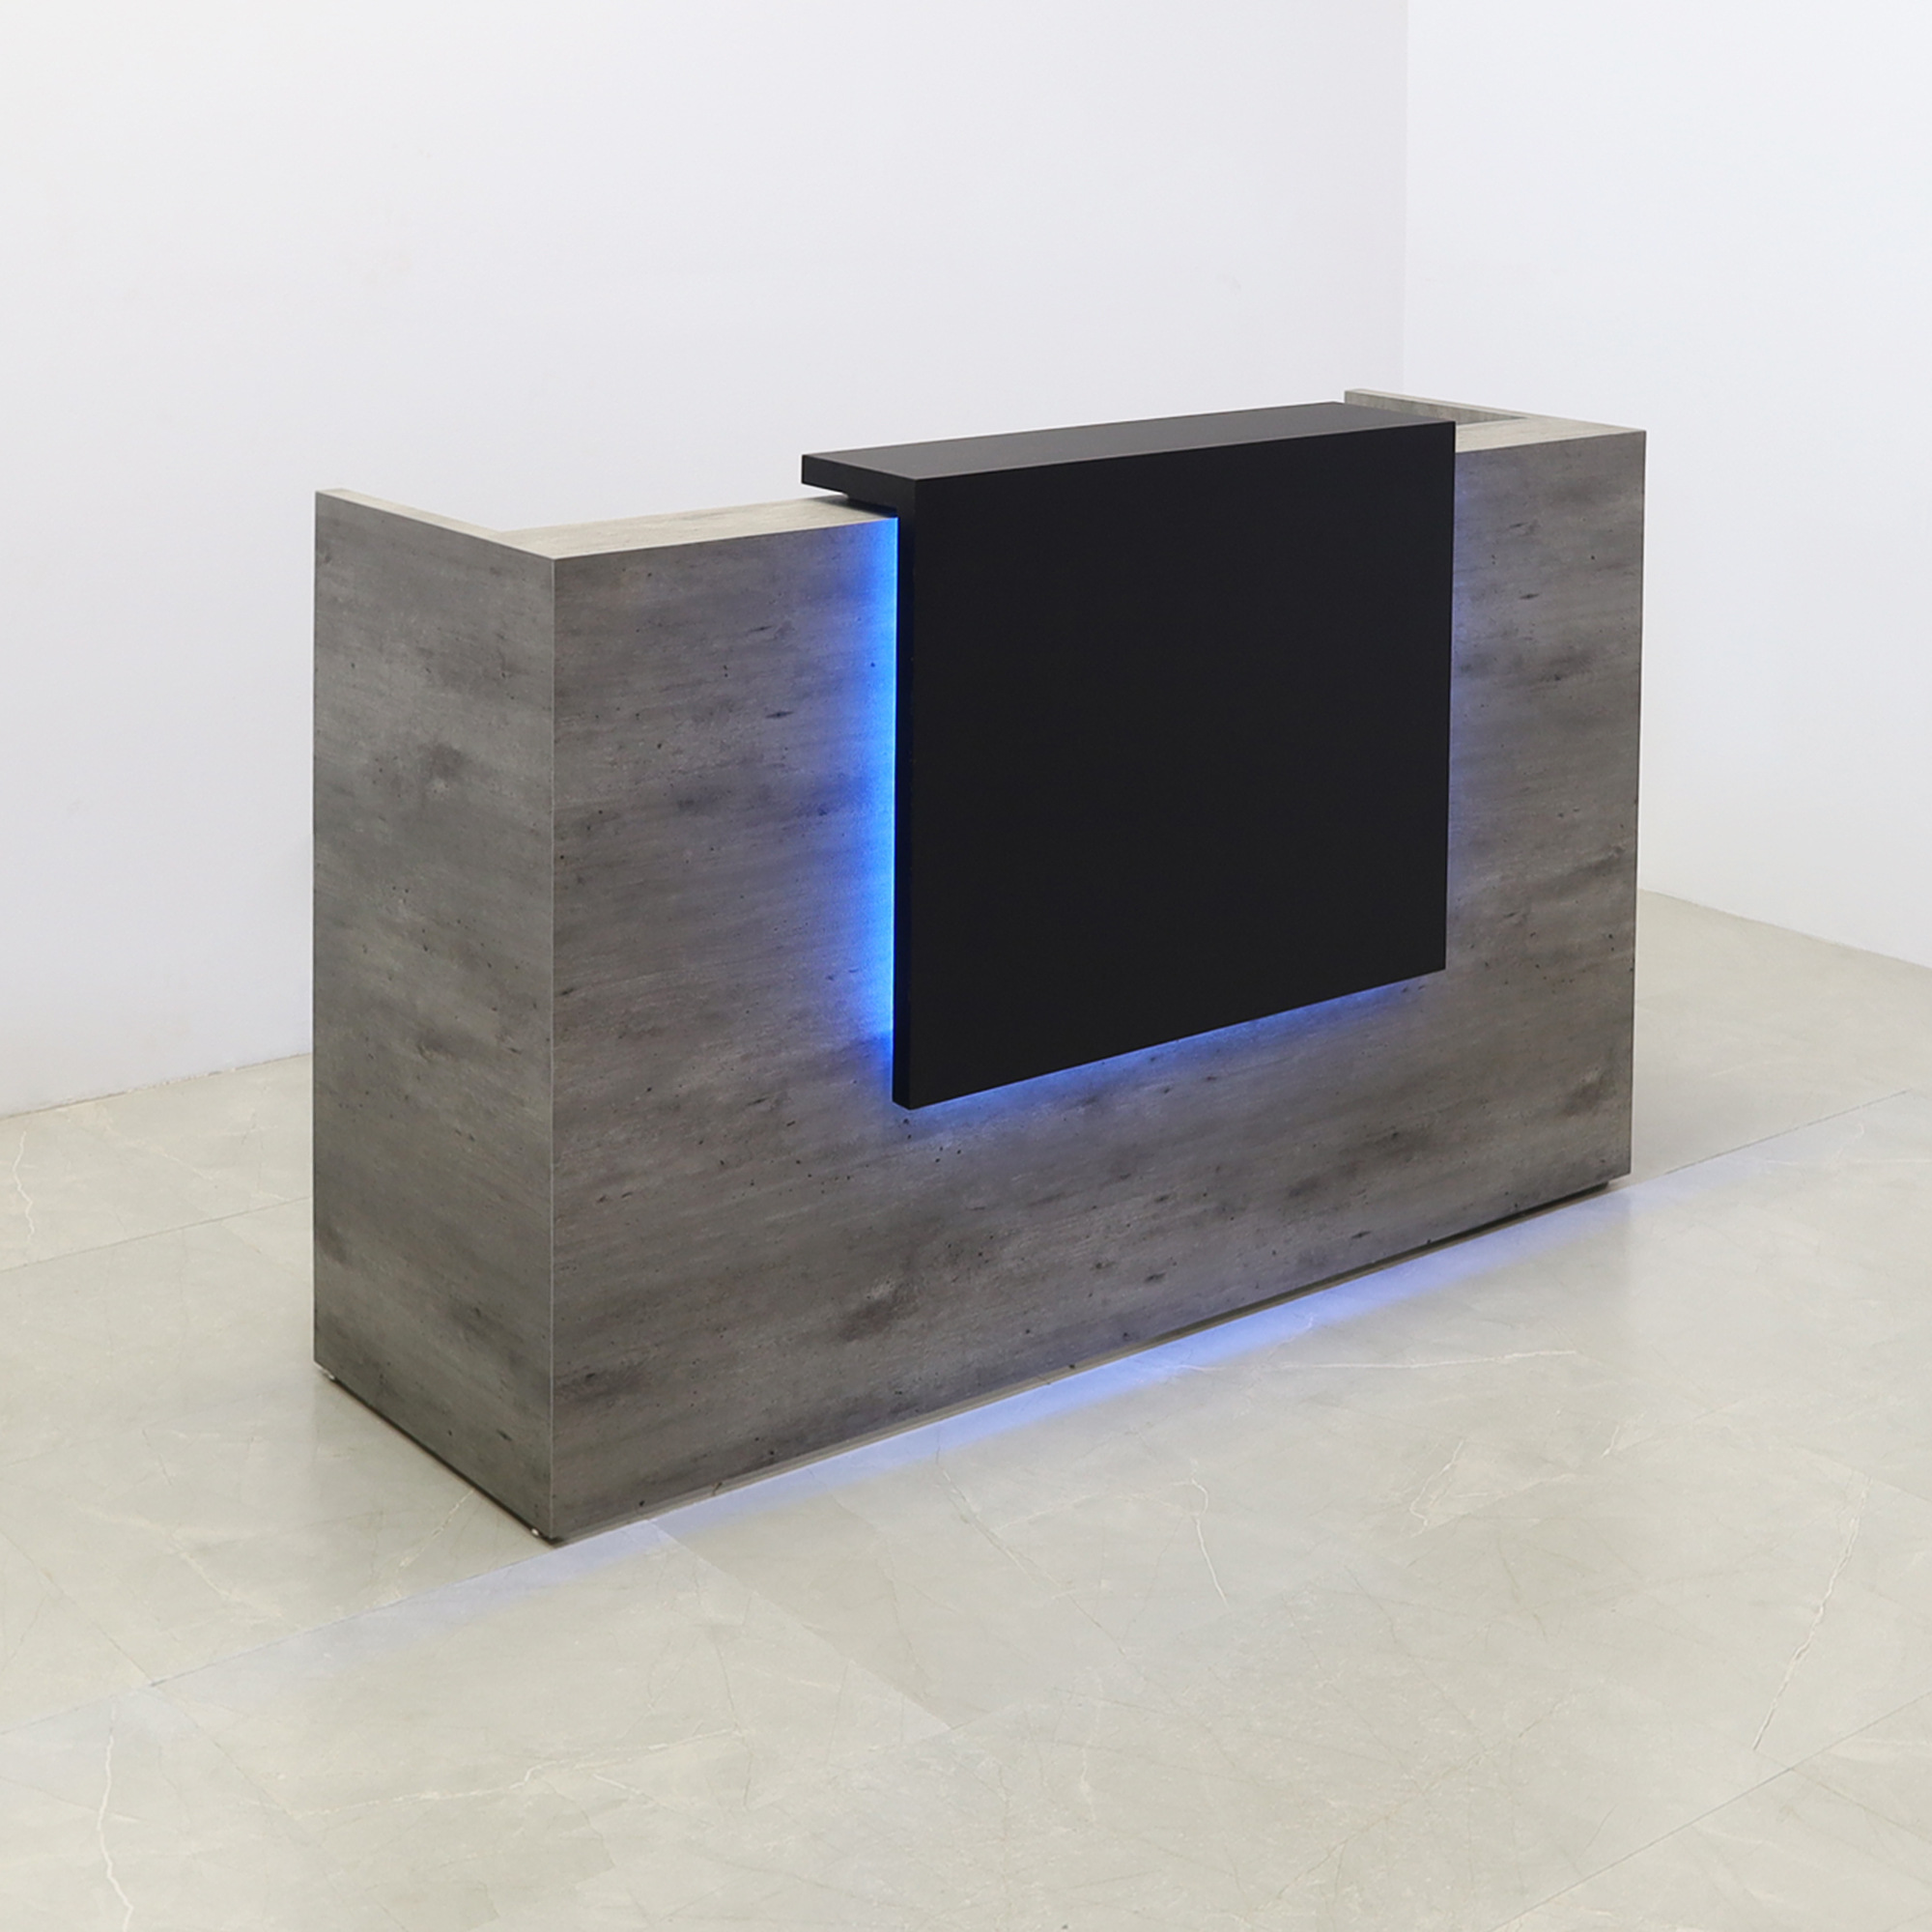 72-inch Chicago Custom Reception Desk in black traceless laminate counter and concrete PVC desk, with color LED, shown here.